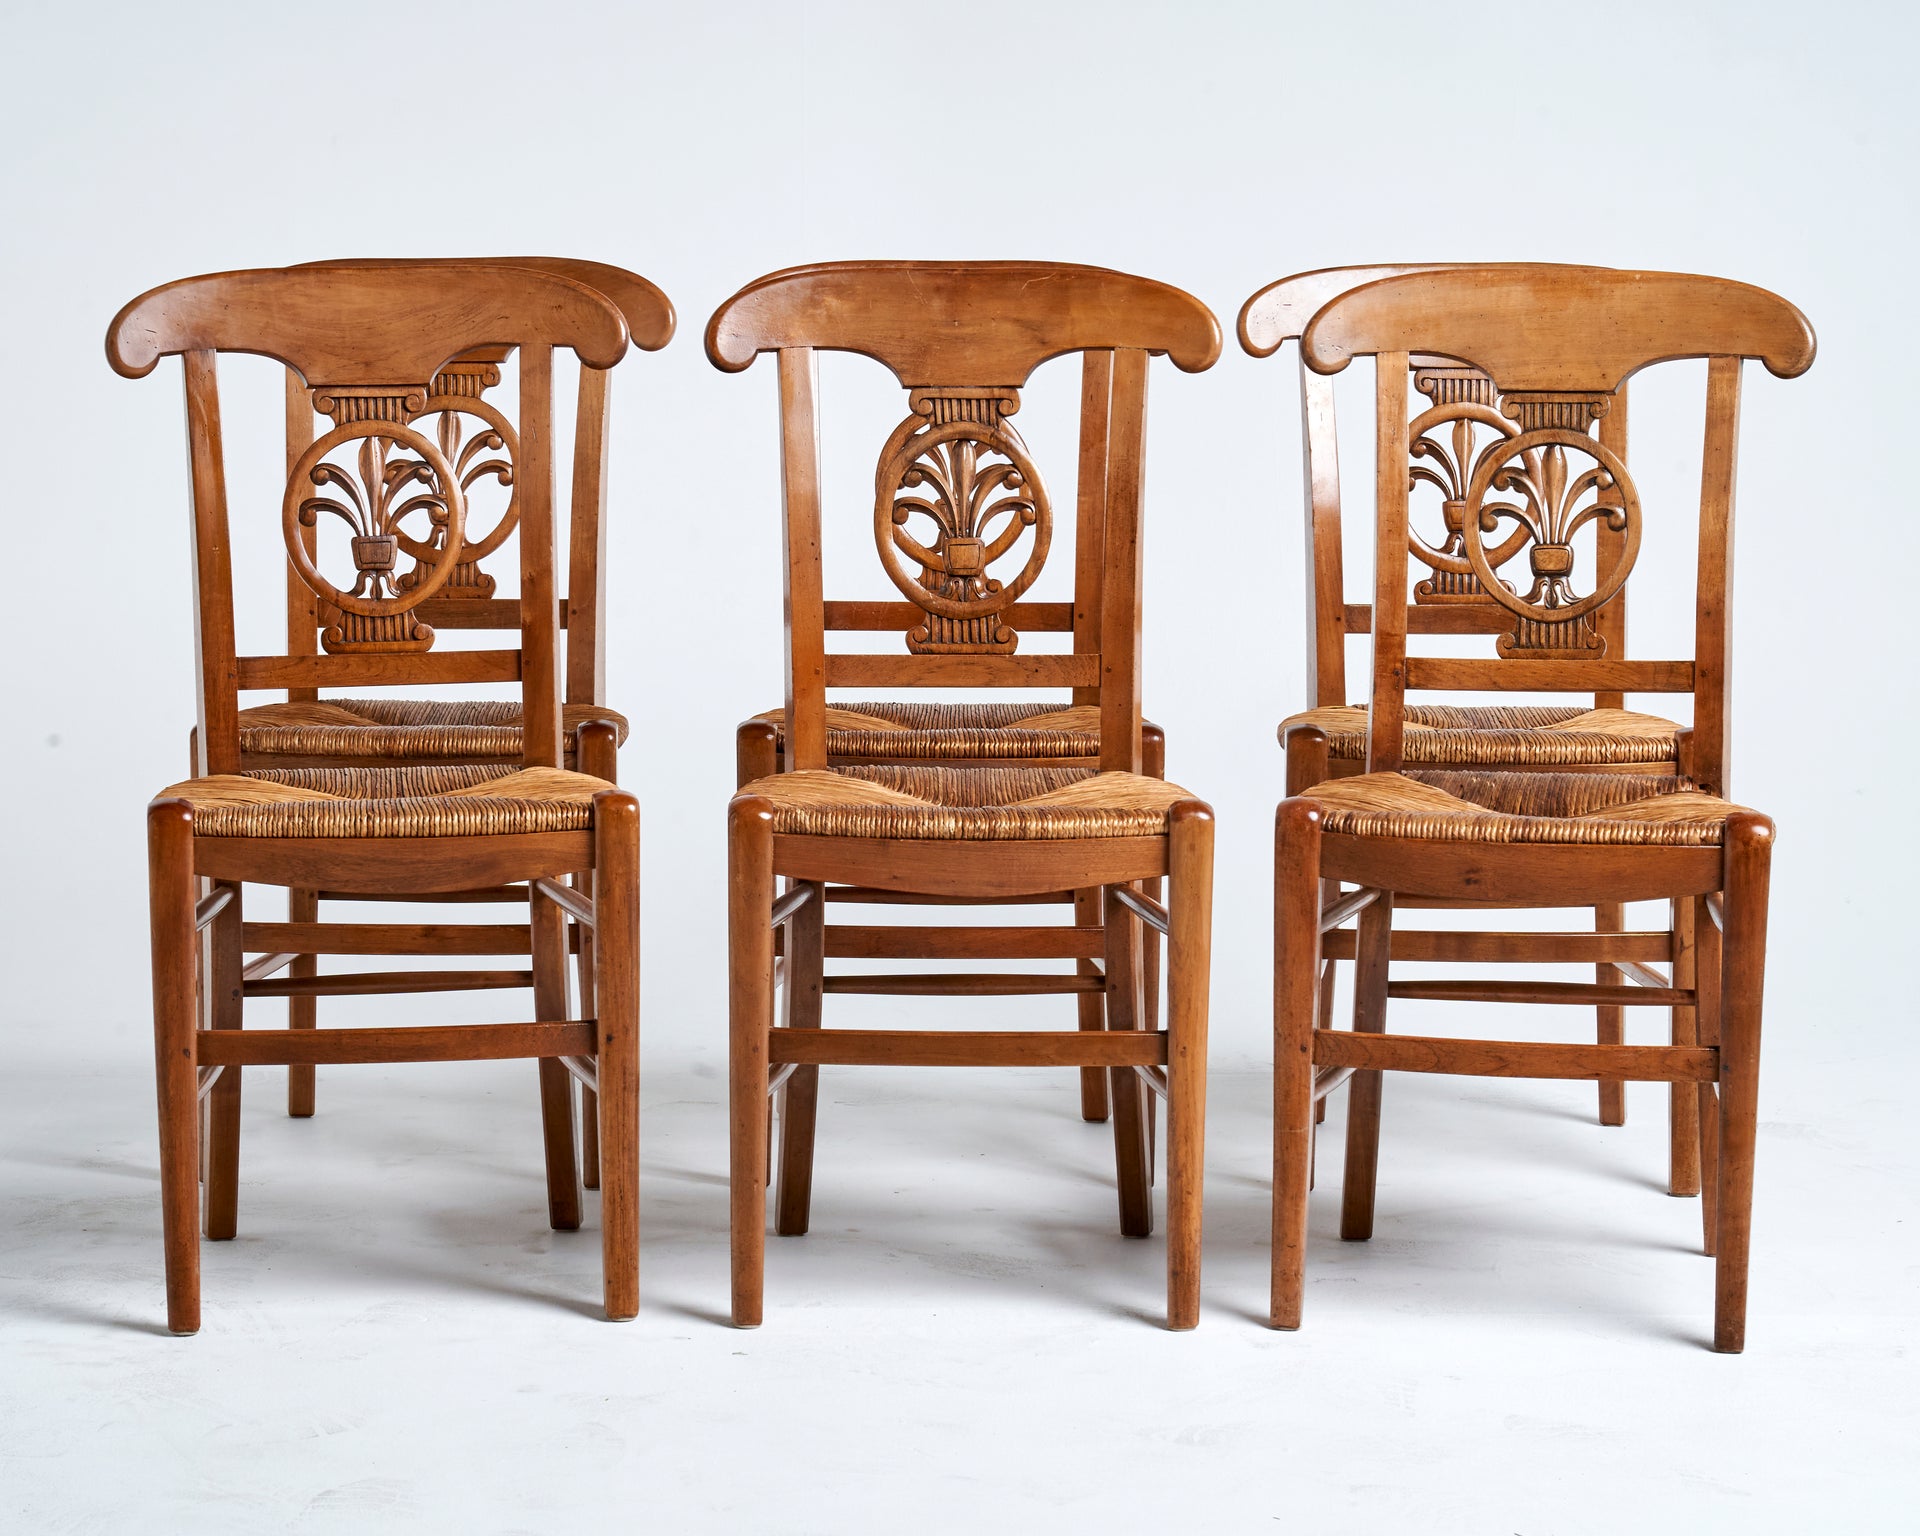 SOLD A uniquely carved set of six solid cherrywood and rush seated chairs, French 19th Century